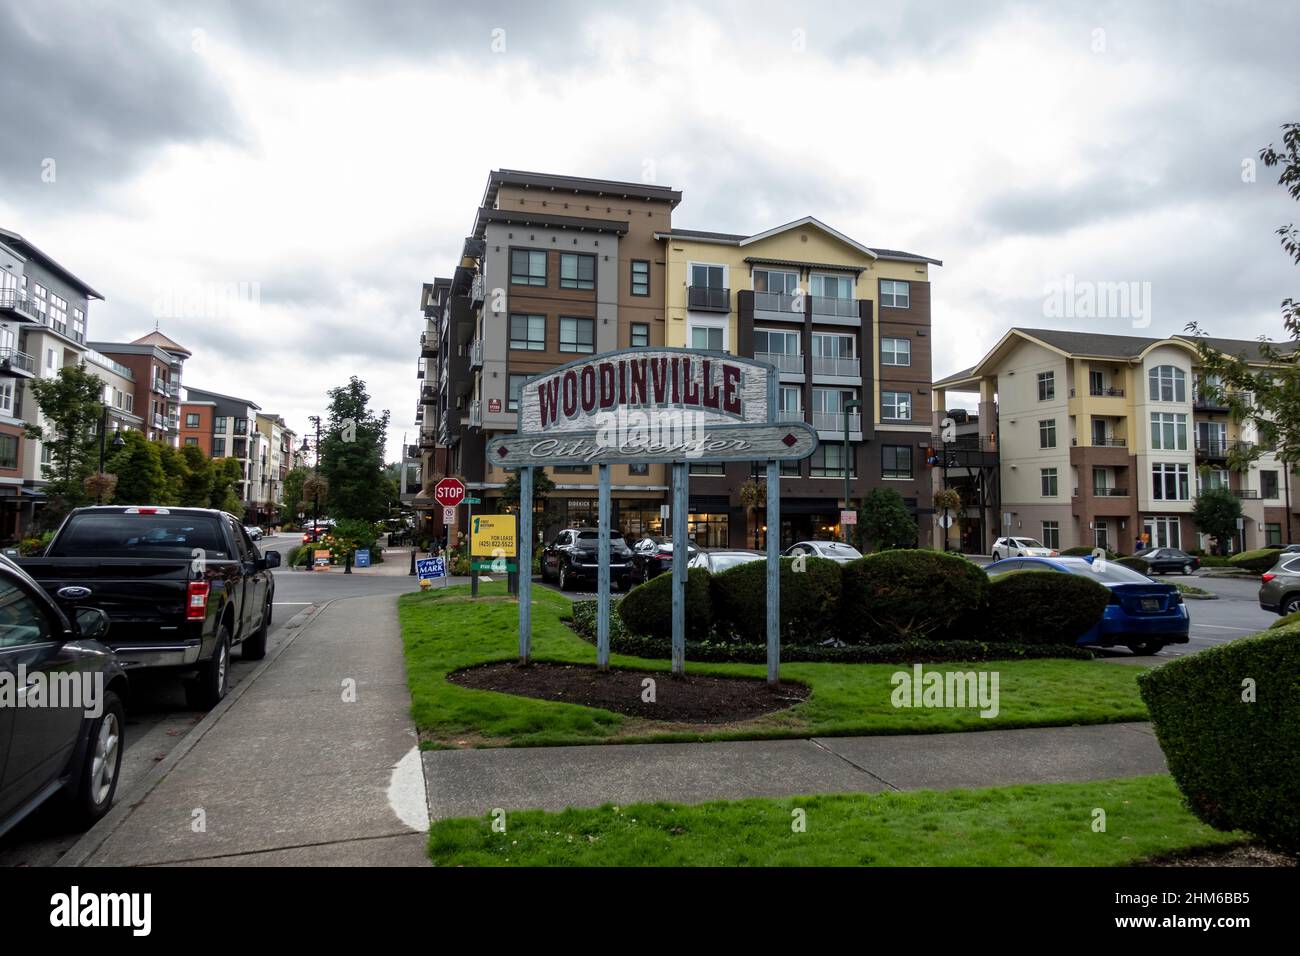 Woodinville, WA USA - circa September 2021: Street view of the Woodinville city center sign outside of a major shopping area on a cloudy, overcast day Stock Photo